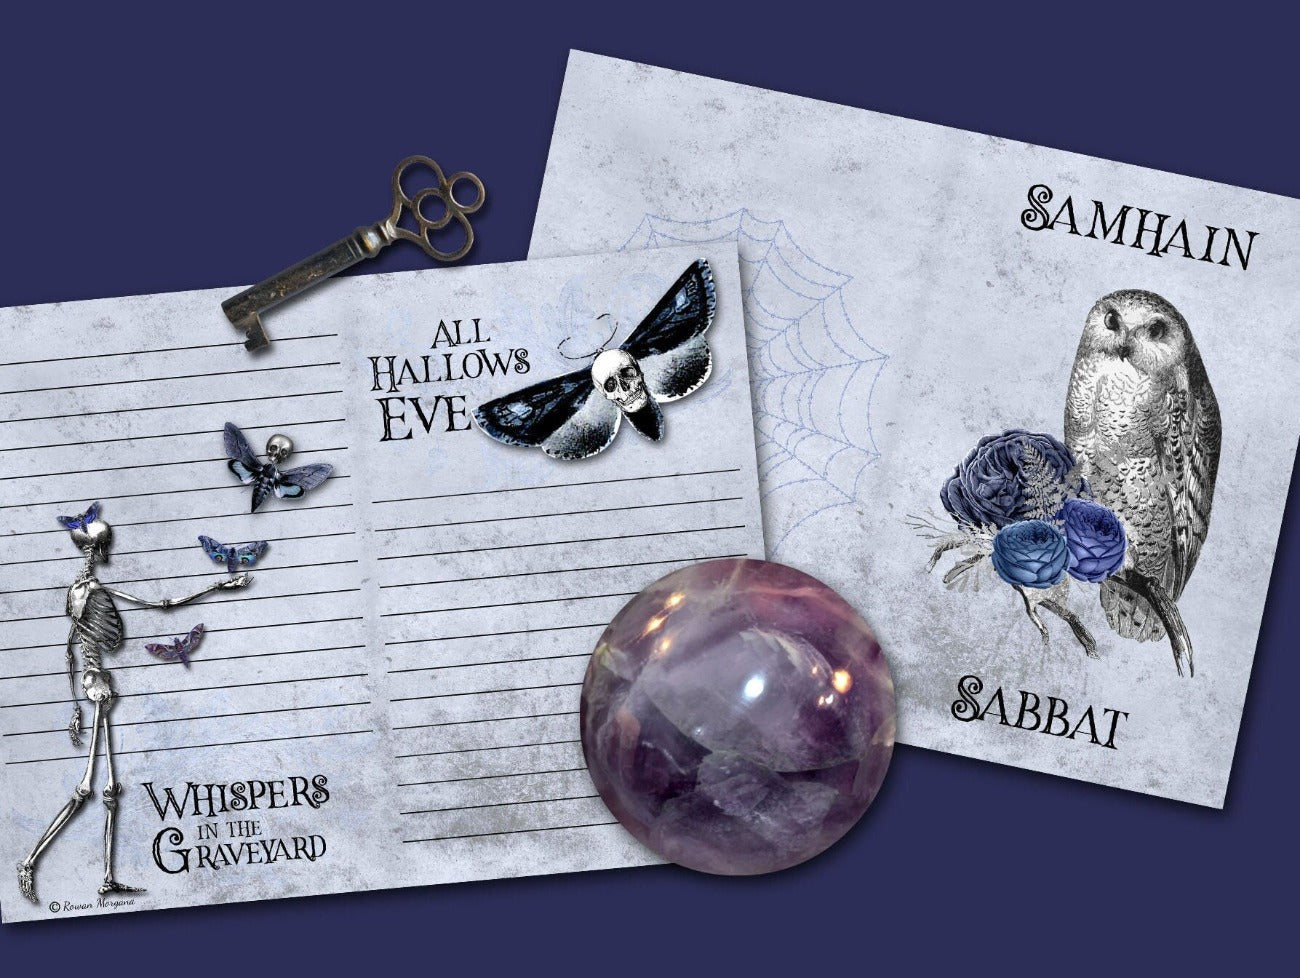 Whispers in the Graveyard, All Hallows Eve, and Samhain Sabbat - SAMHAIN JUNK JOURNAL Kit Printable Pages - Morgana Magick Spell